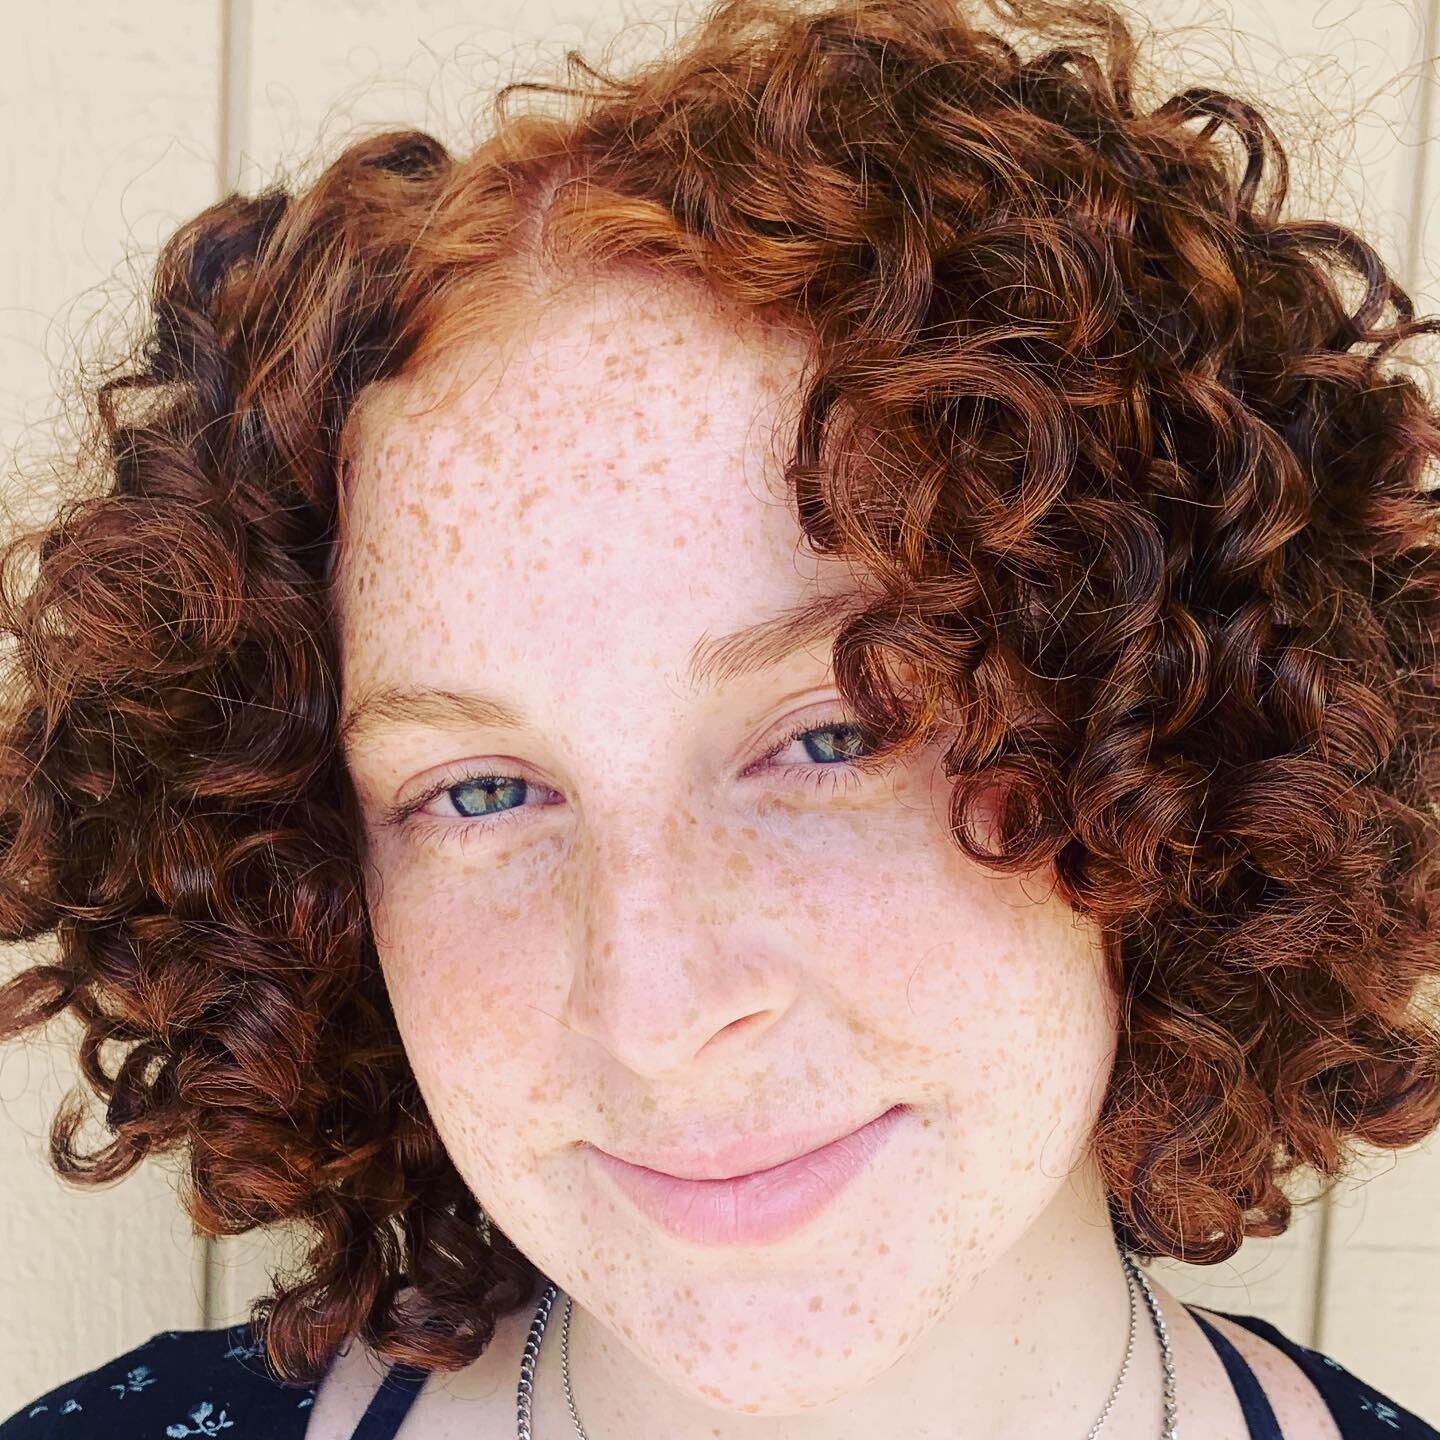 All ready for school! All those ginger curls&hellip;#curlyhair #curlygingerhair #gingercurls #curlybob #shortcurlyhair #shortcurls #curlyhairsalon #rezocut #devacut #deva #santarosacurls #santarosacurlstylist